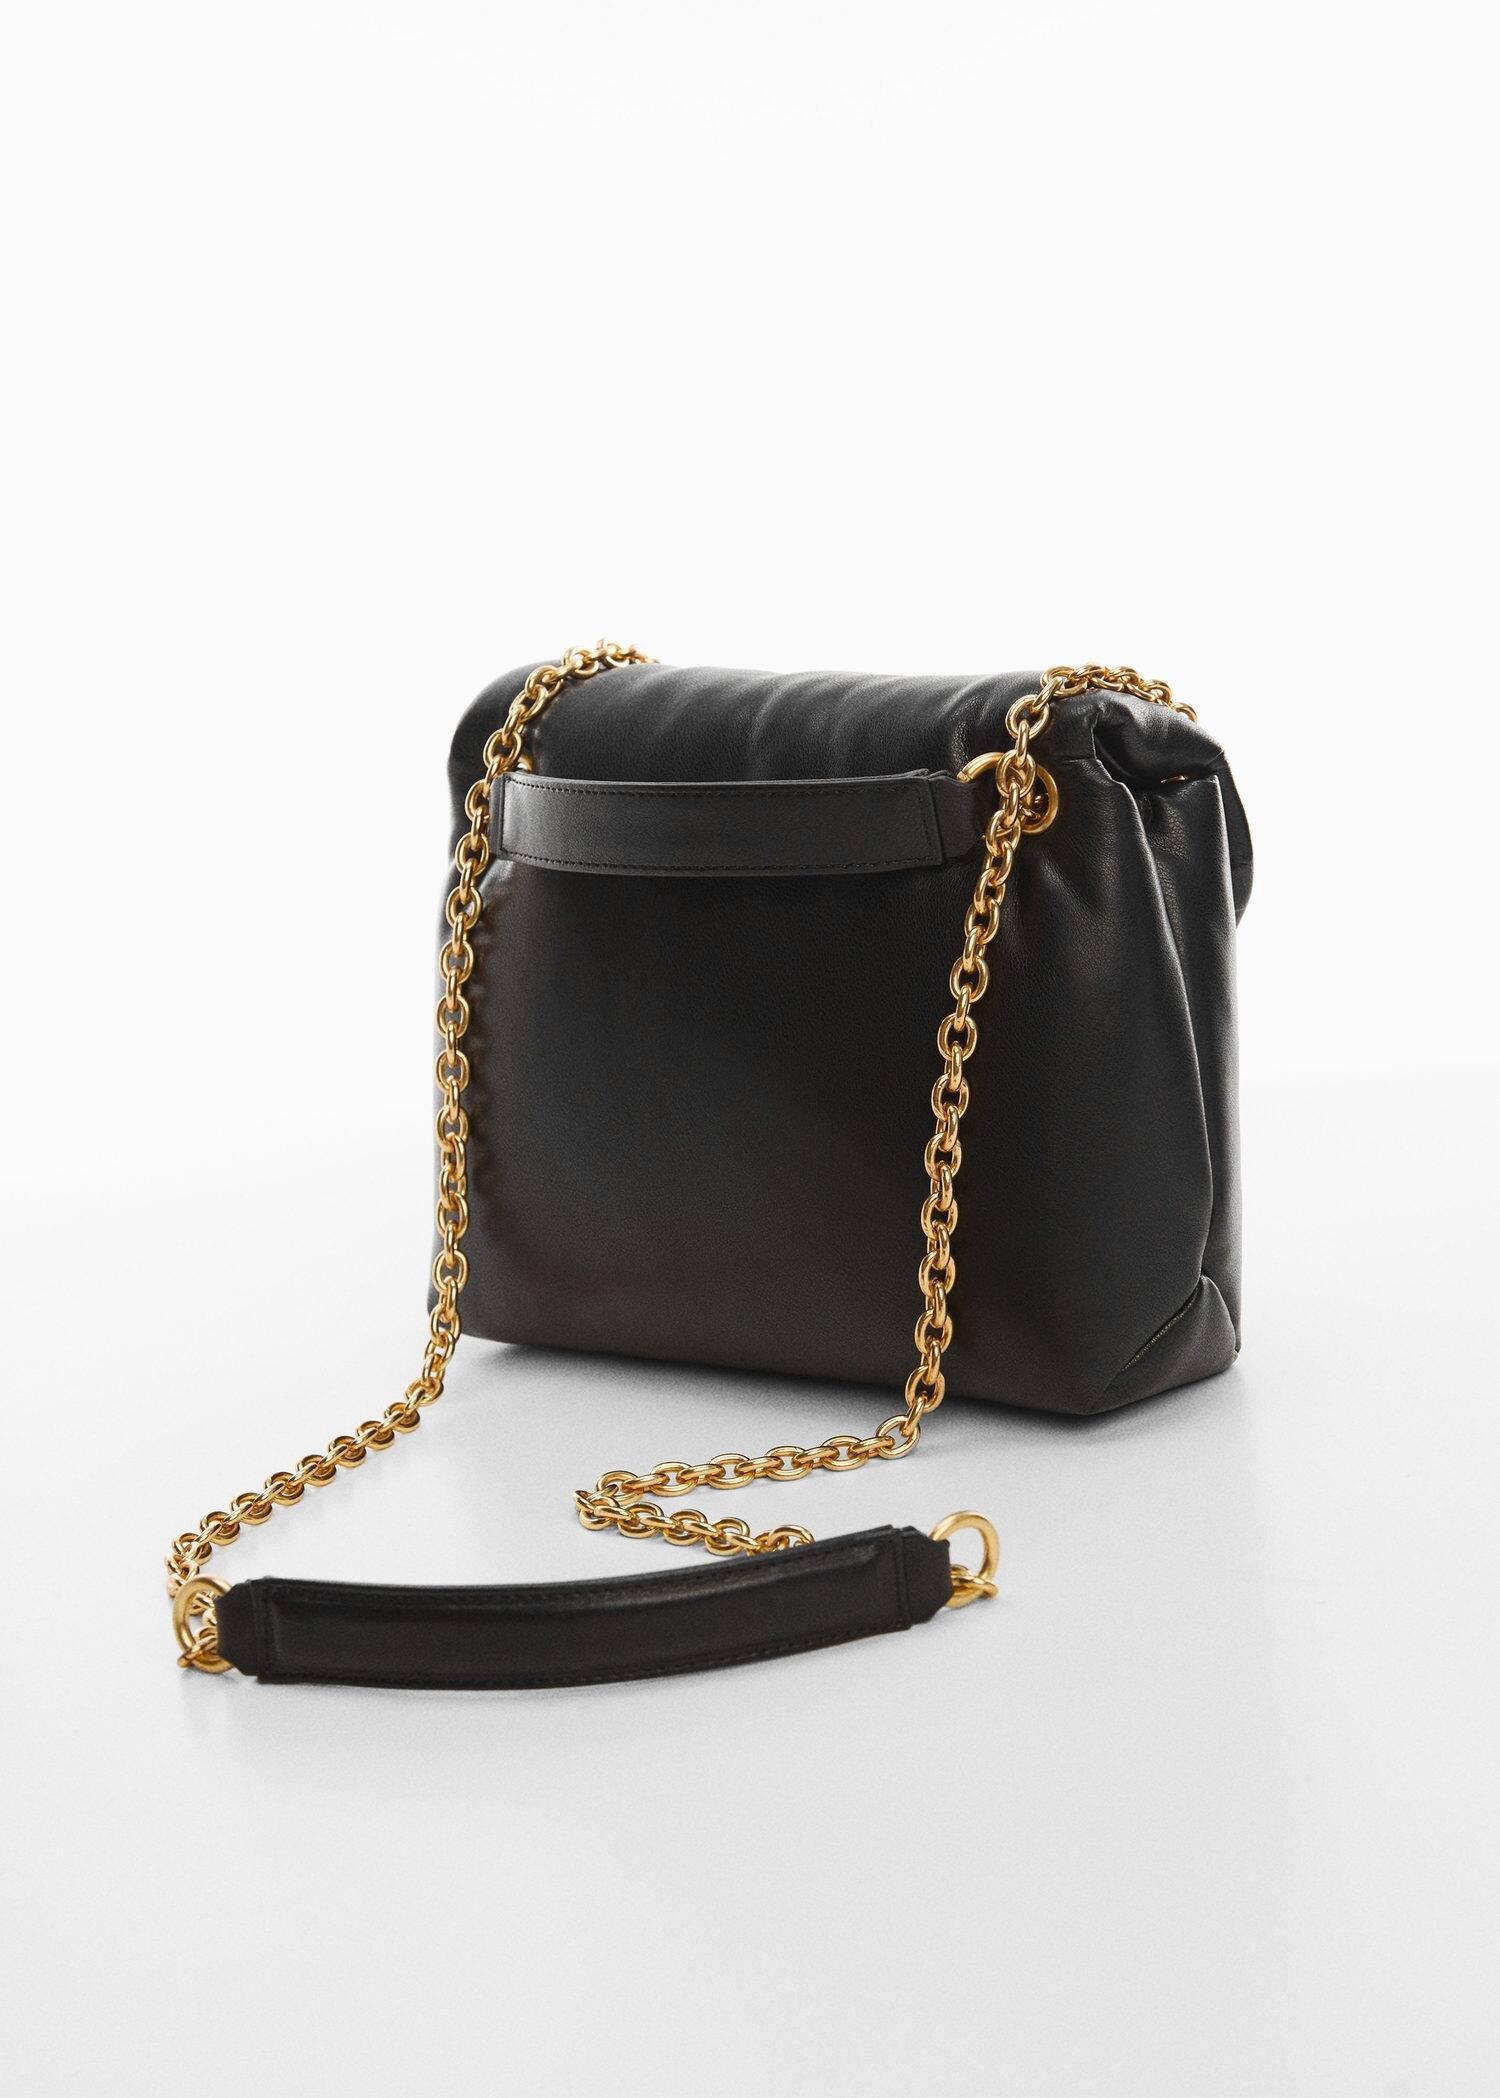 Mango Quilted Double Chain Shoulder Bag, Black